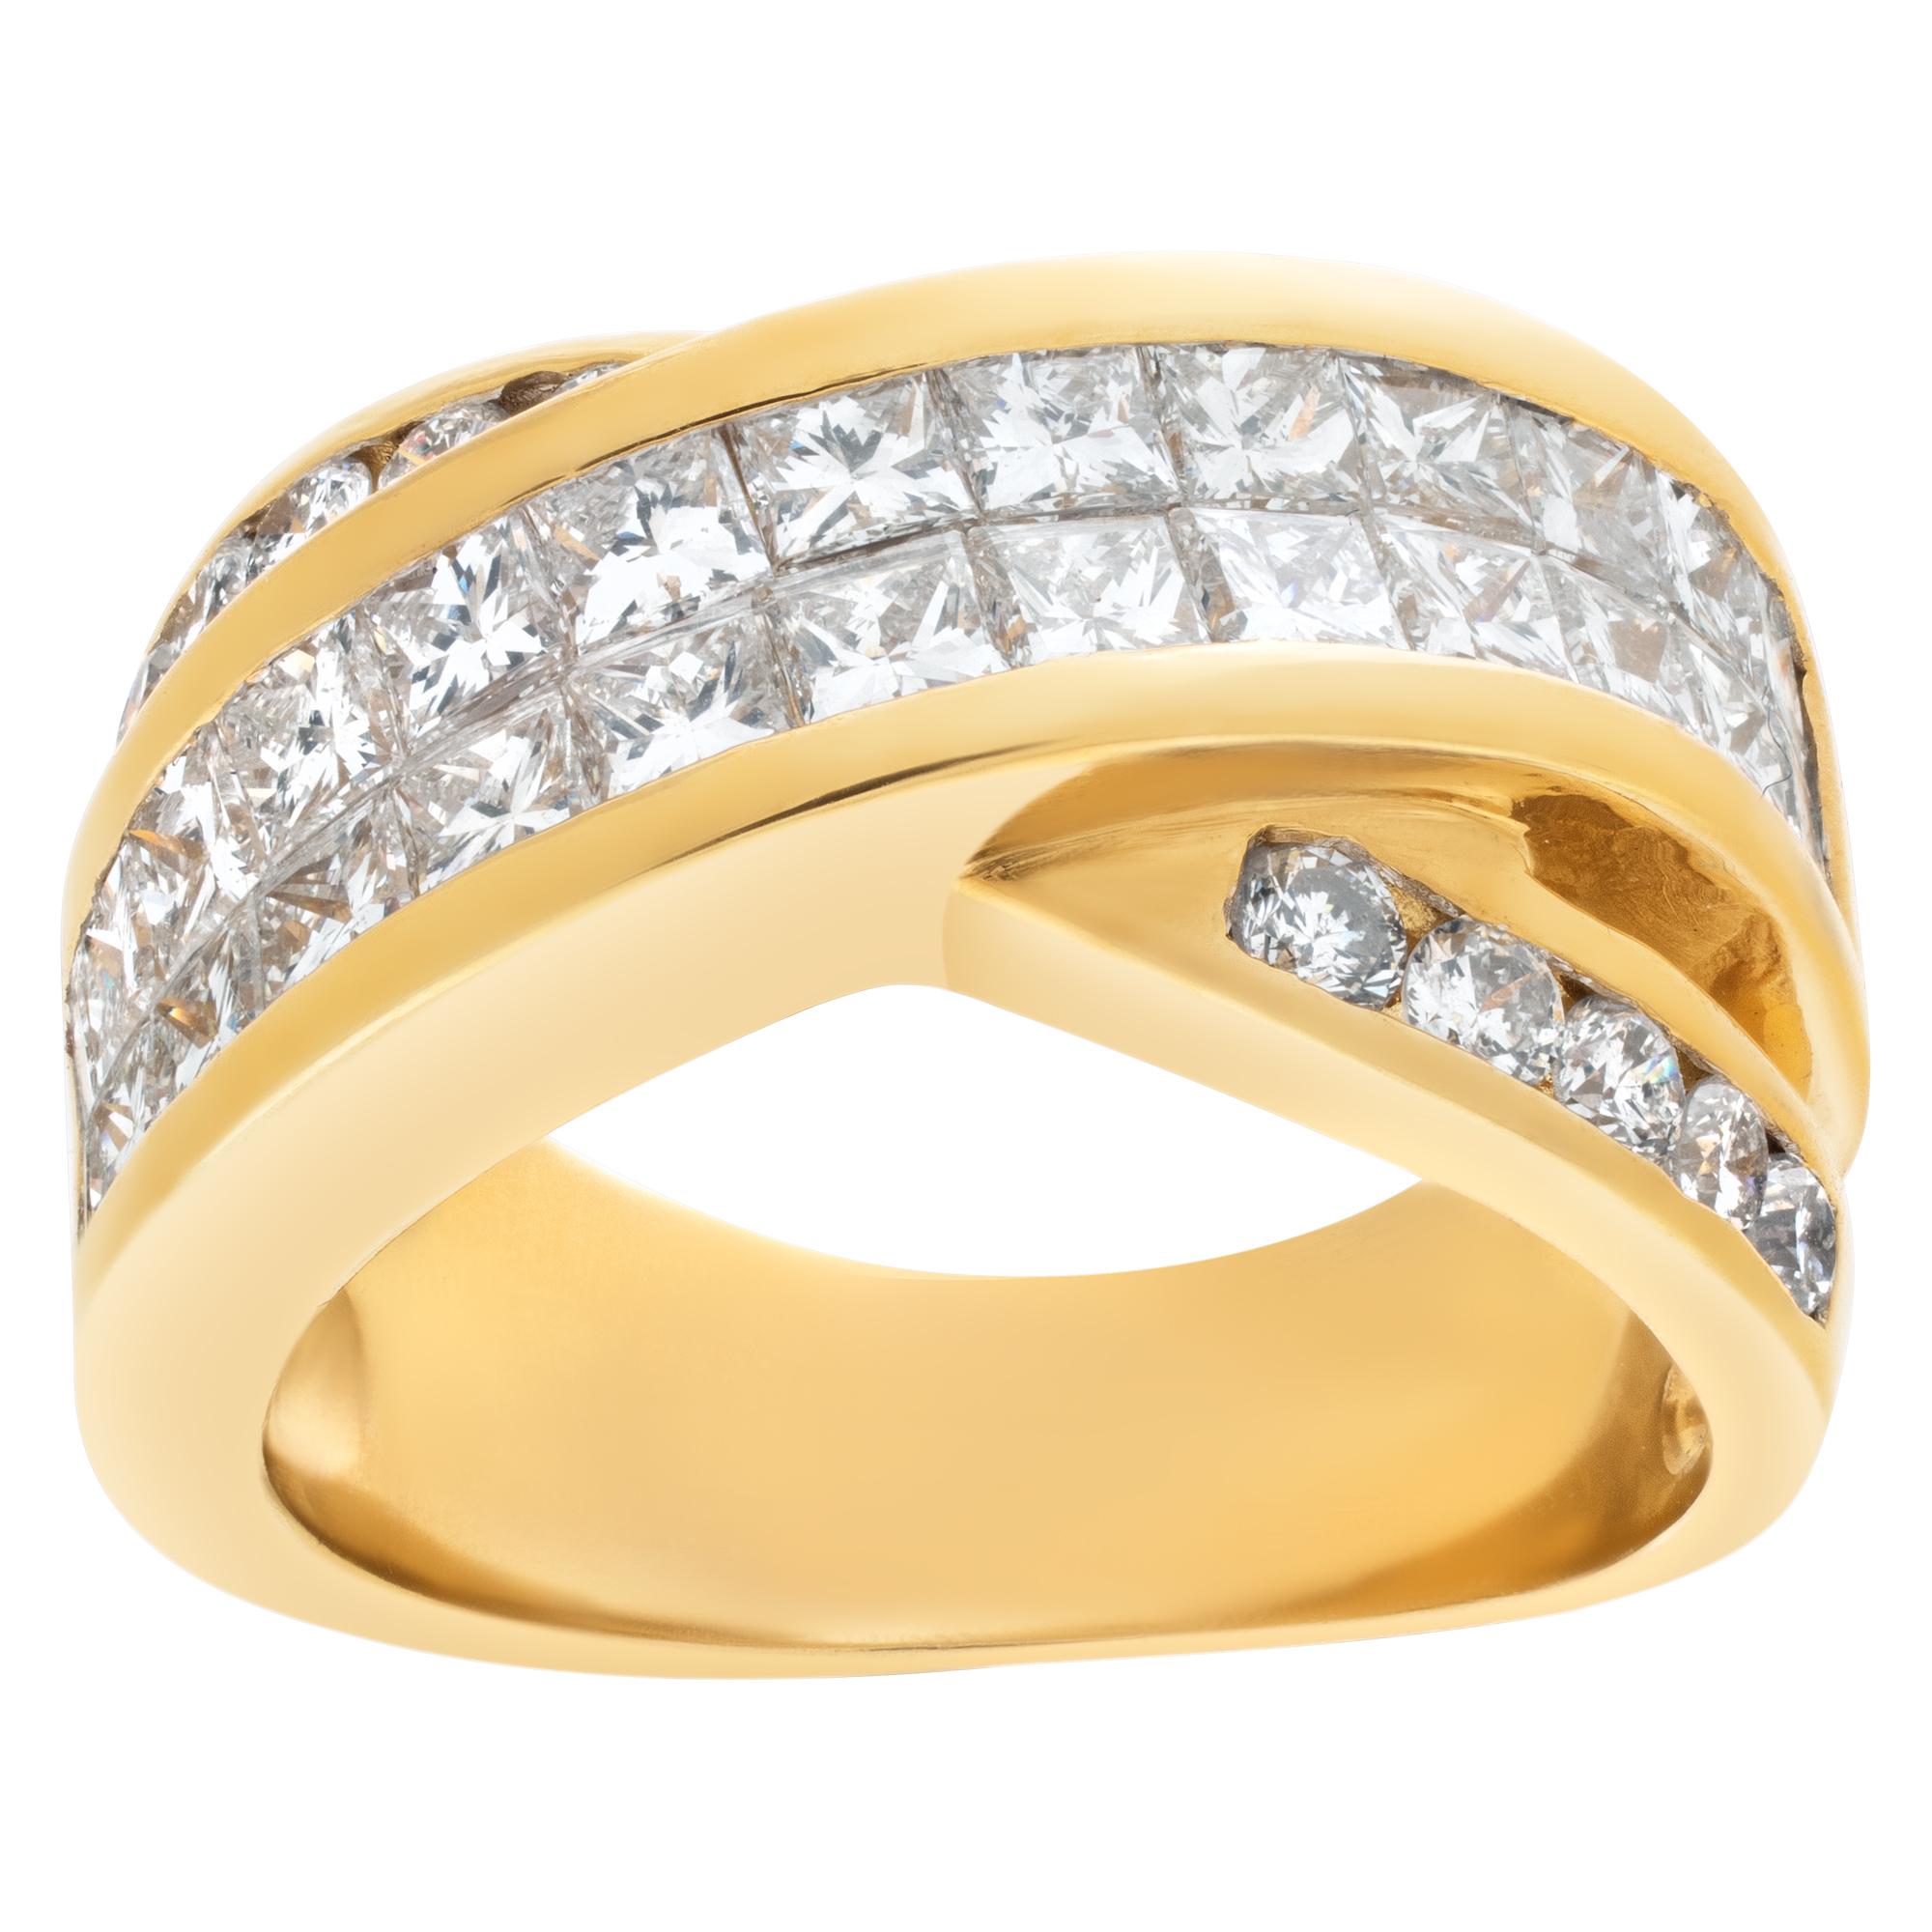 Stunning criss cross diamond ring with over 3 carats in princess cut and round cut diamonds set in 18k yellow gold. Front of the ring measures 11mm, shank 5.5mm. Size 7.5.

This Diamond ring is currently size 7.5 and some items can be sized up or